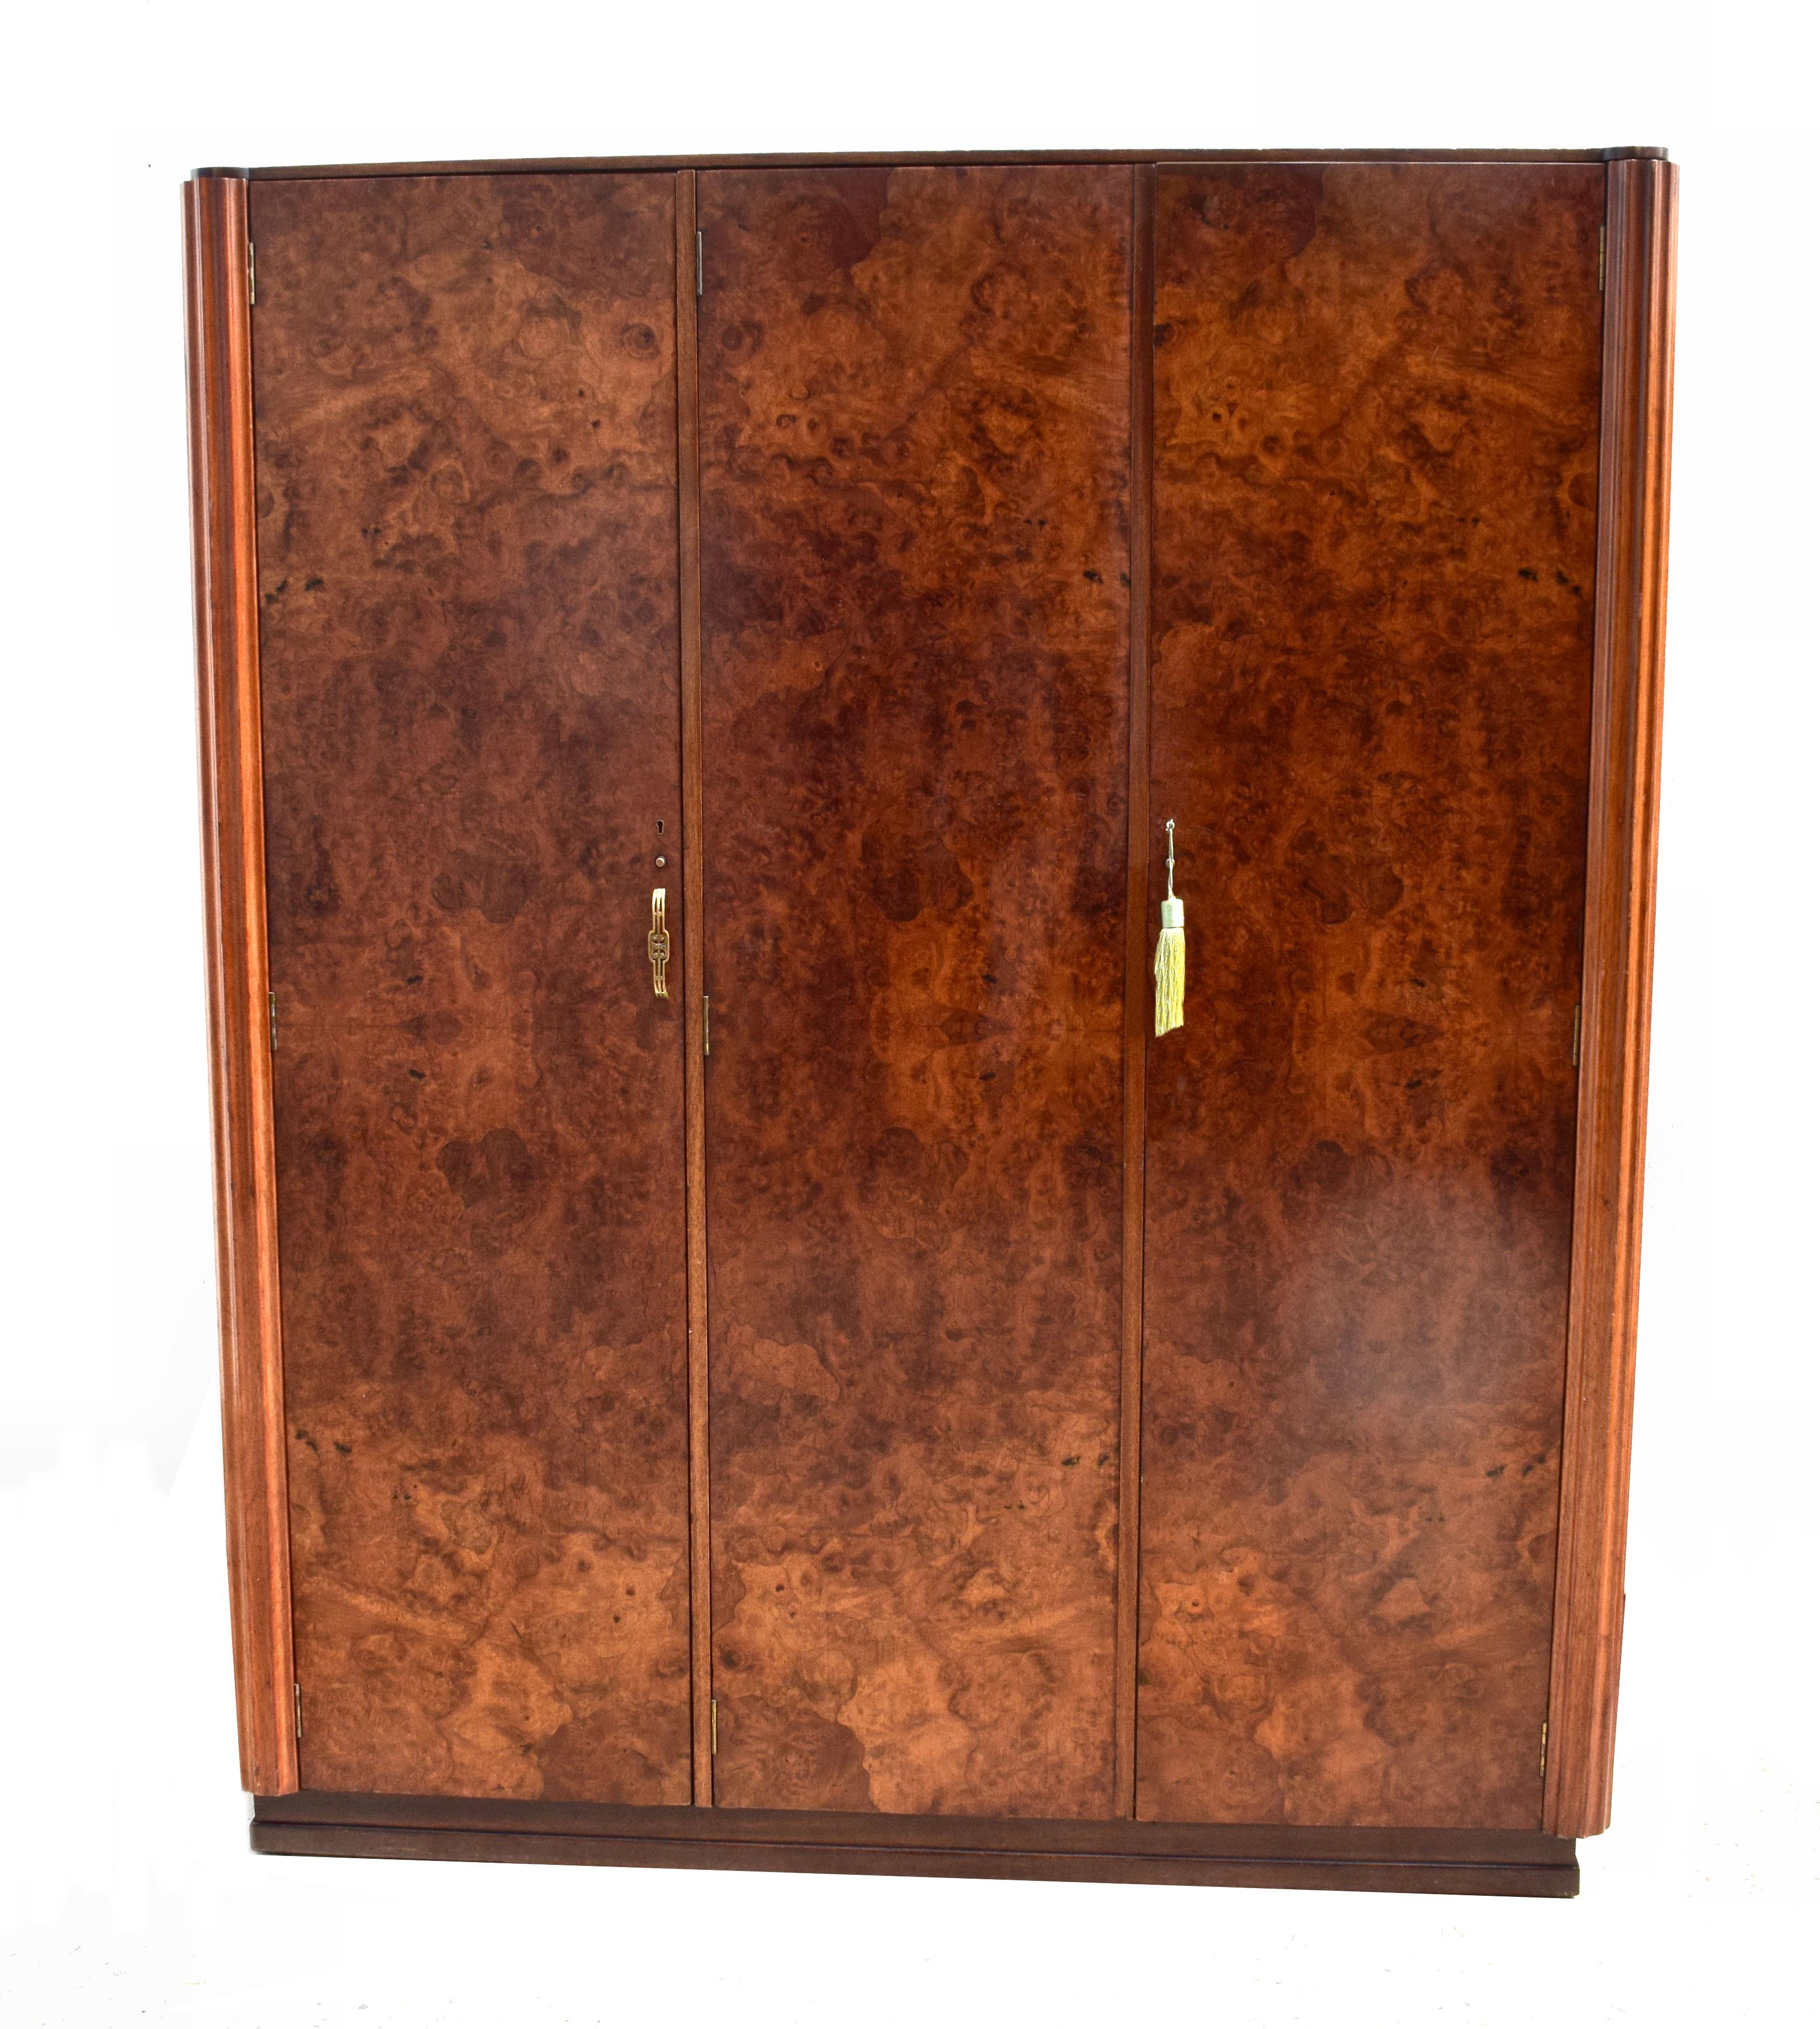 Superb and totally original is this 1930s Art Deco triple door wardrobe with working key. Not only does this wardrobe look impressive with its heavily figured veneers which match and follow on each door but it's extremely generous in the storage it